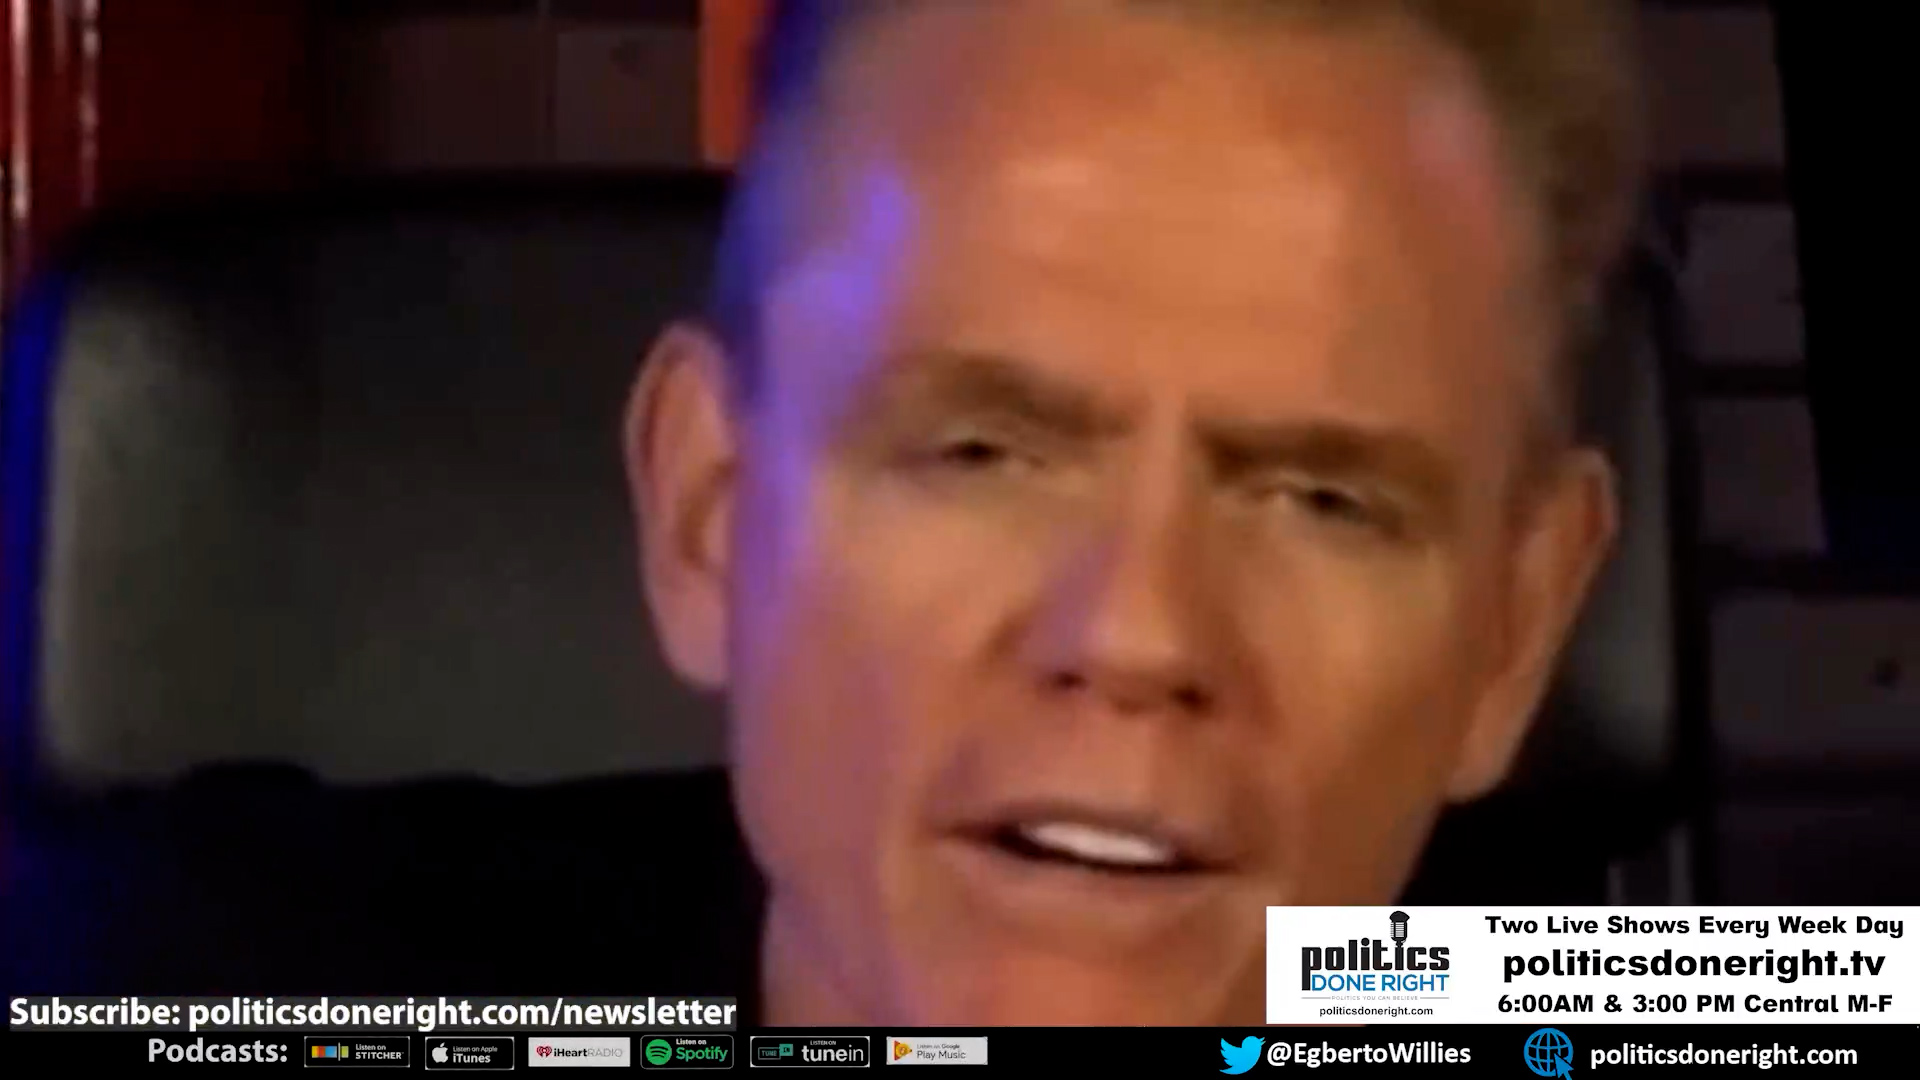 Comedian Christopher Titus schooled MAGA on some sad realities about their stances.